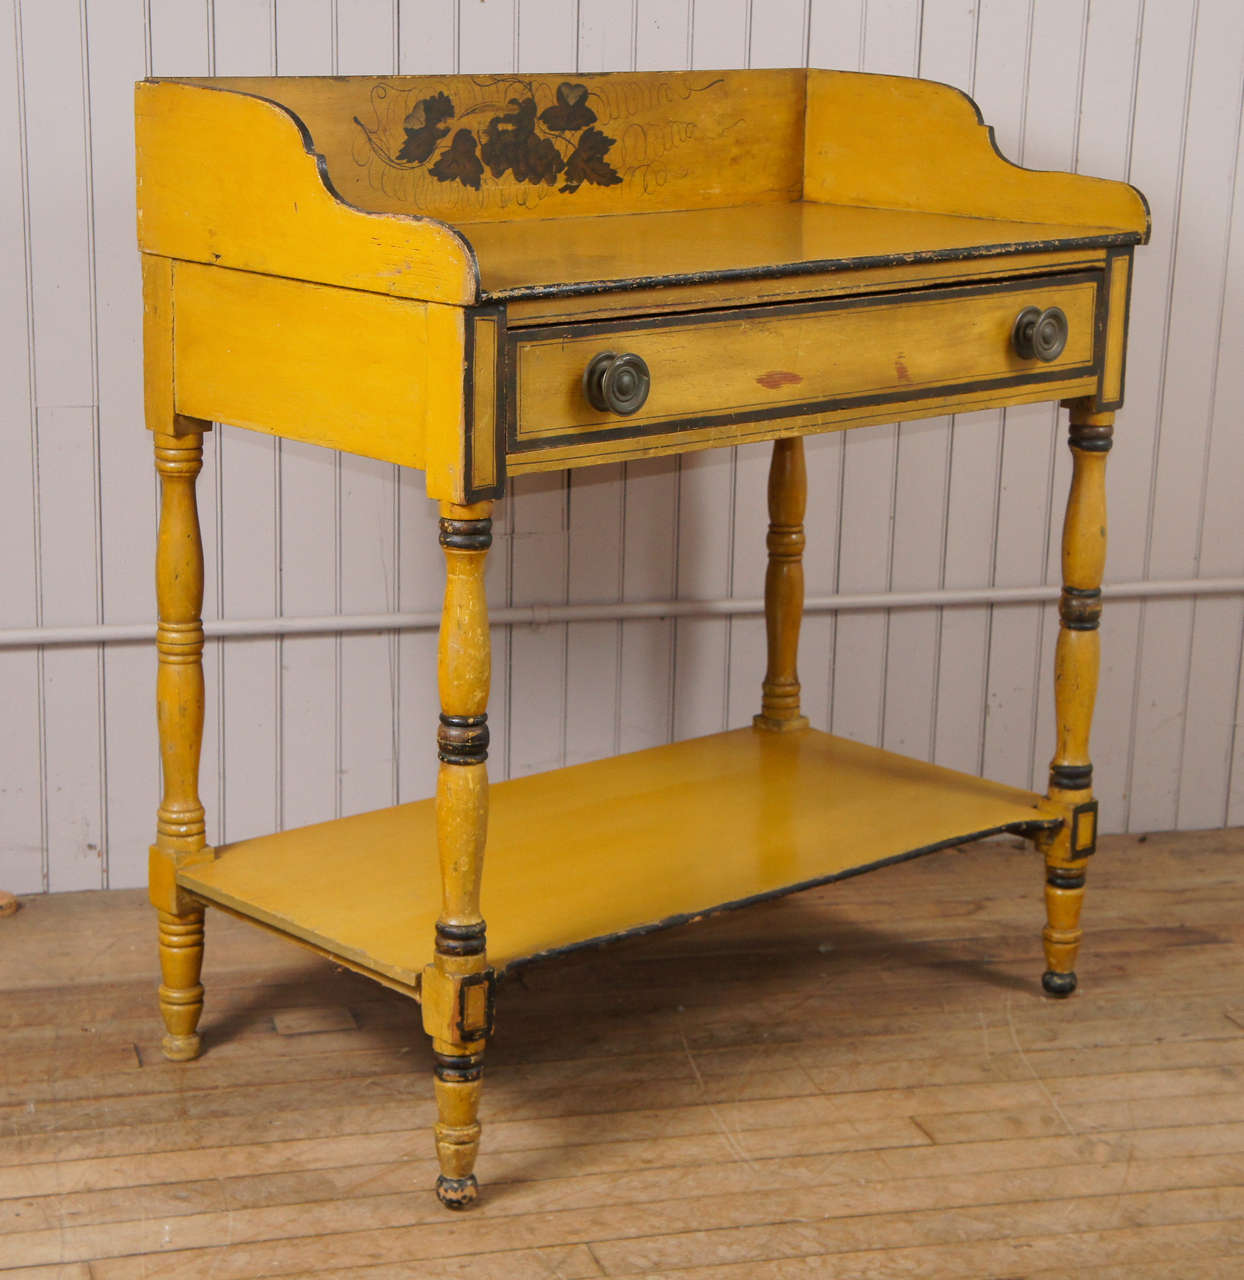 country server - in original chrome yellow painted surface - stenciled freehand bronze decoration - original Sheraton pulls